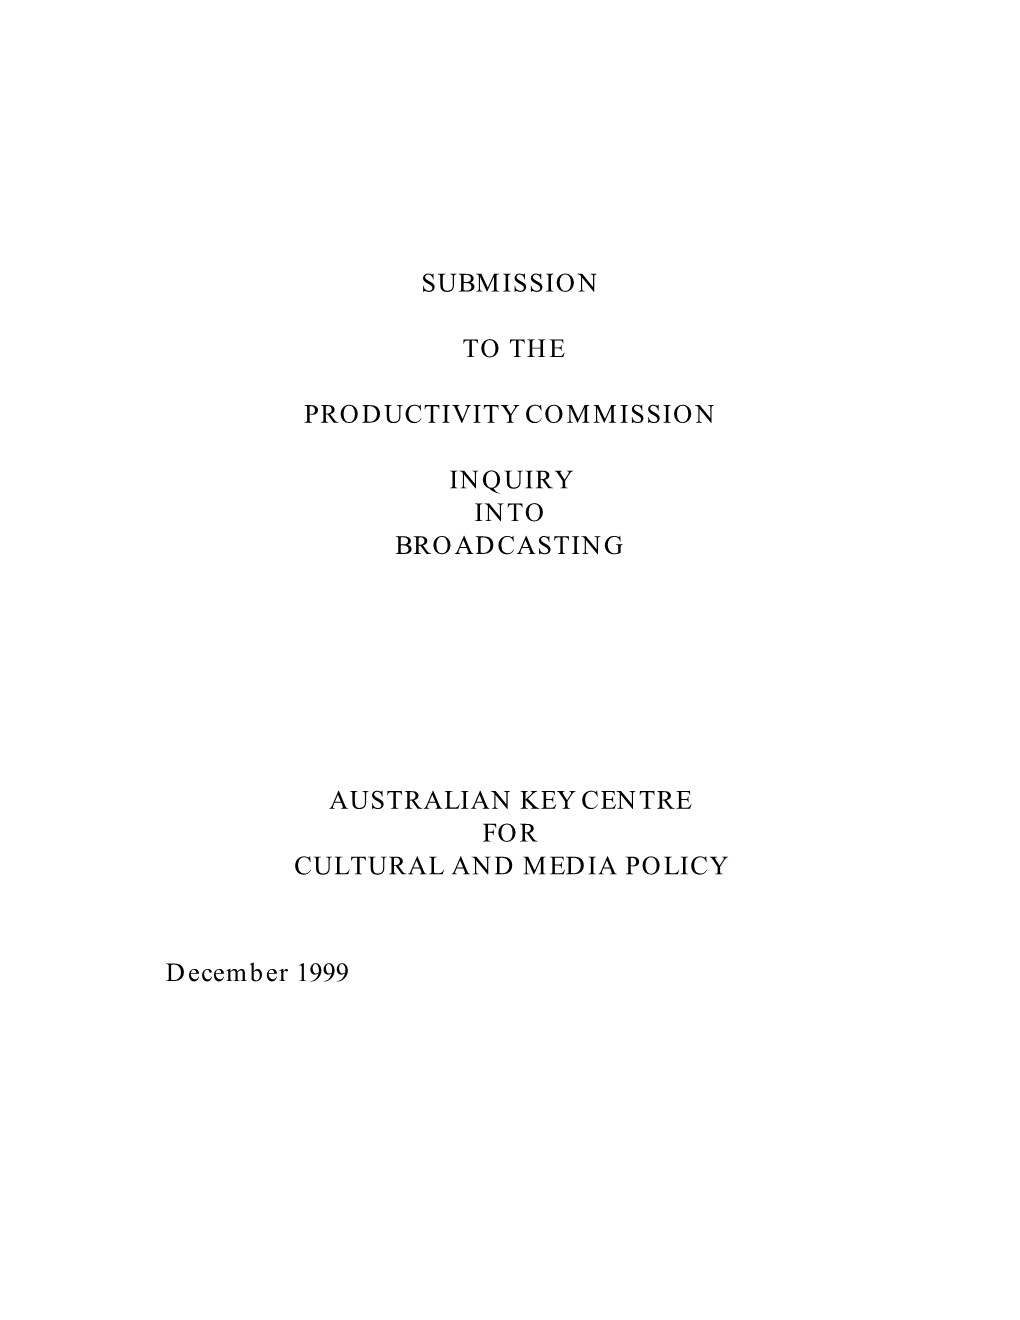 Submission to the Productivity Commission